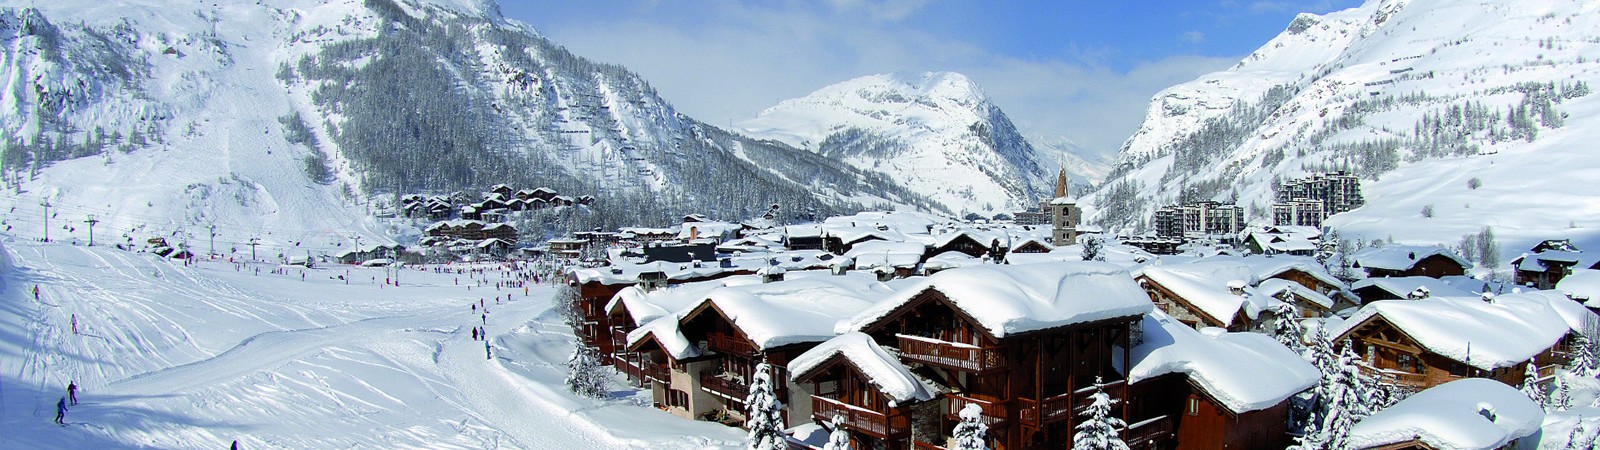 Val d'Isere dorp